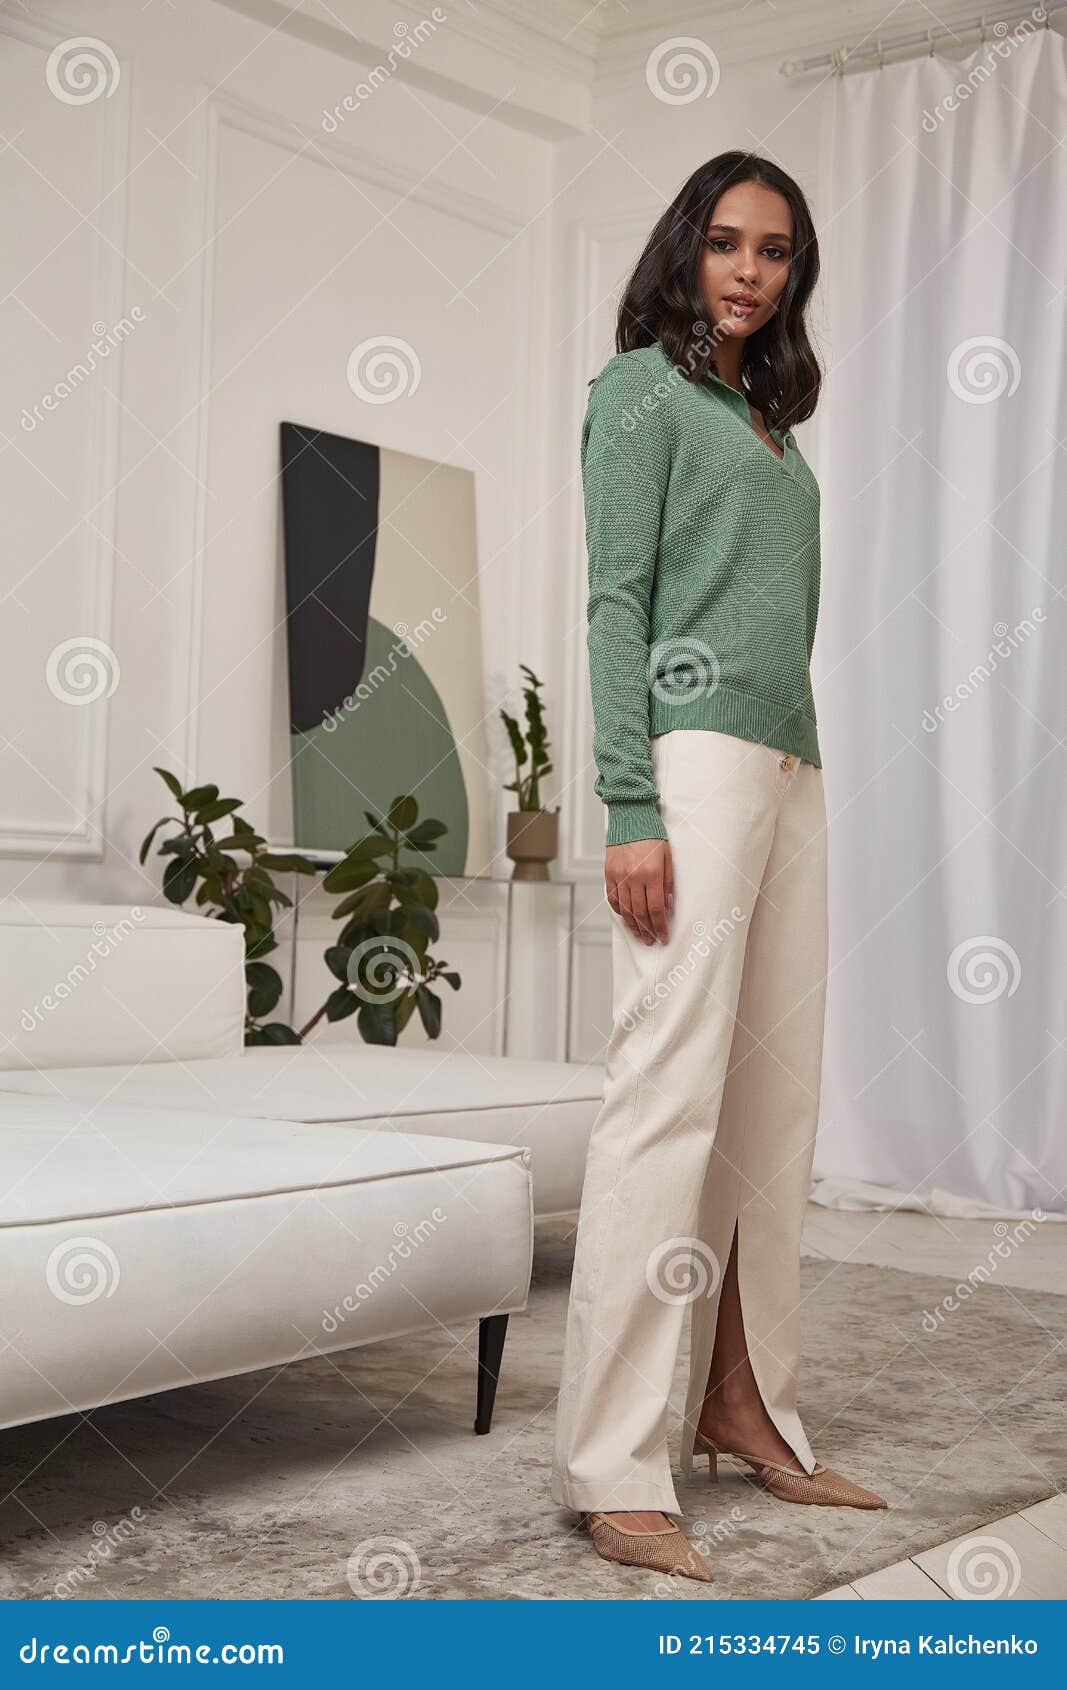 64,200+ Girl In White Pants Stock Photos, Pictures & Royalty-Free